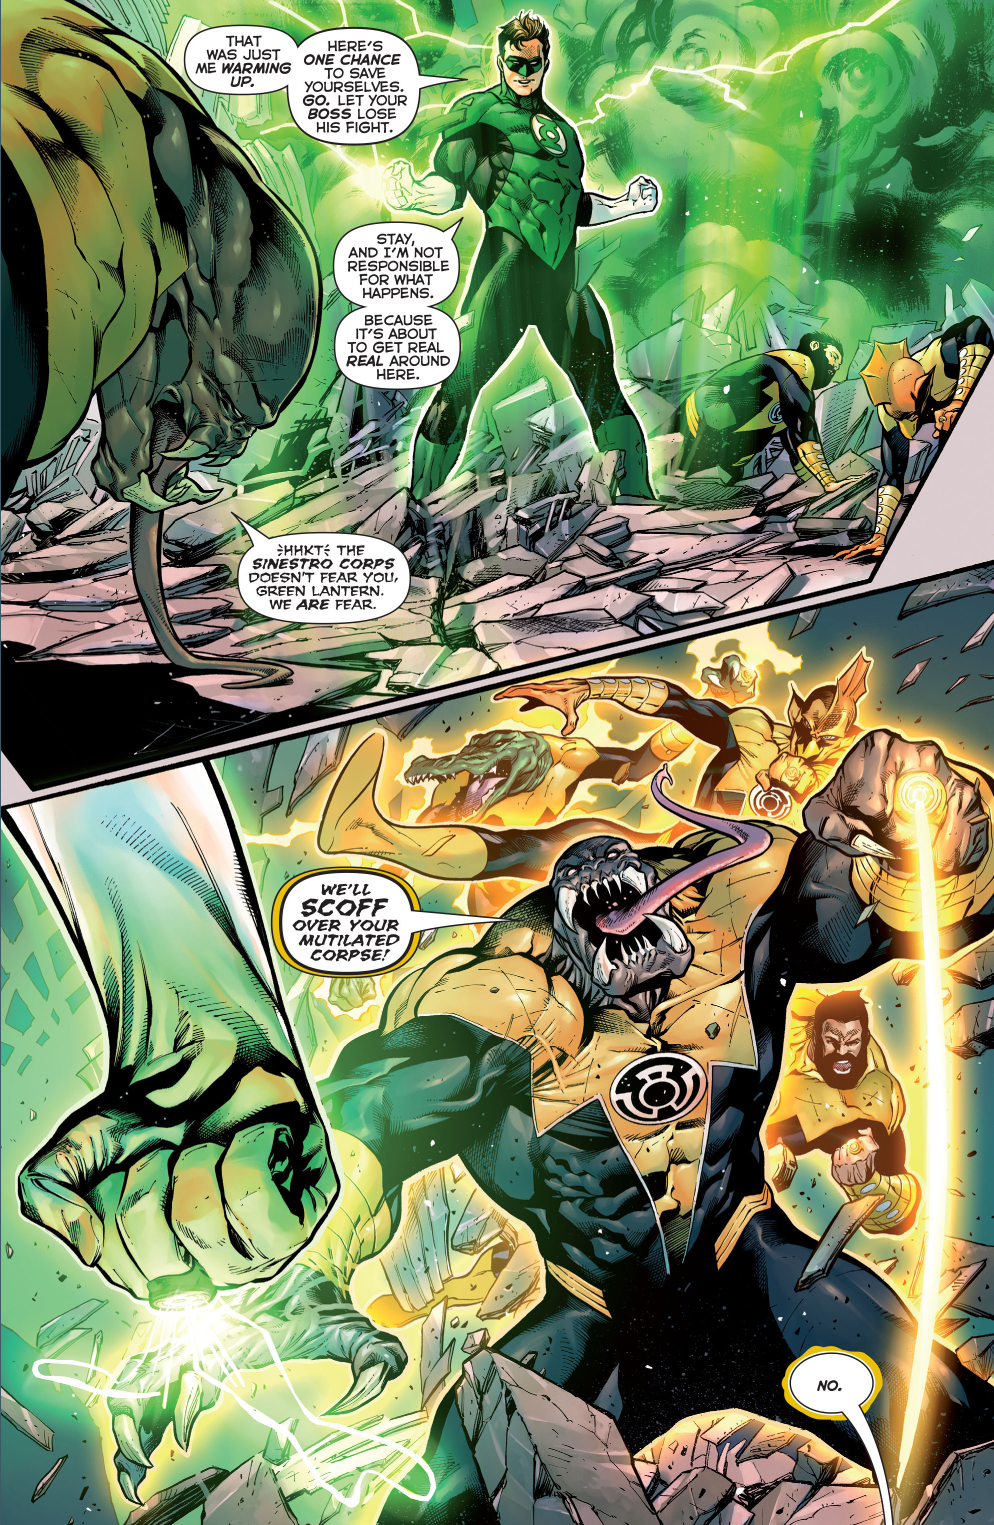 sinestro-charged-his-ring-1000-percent